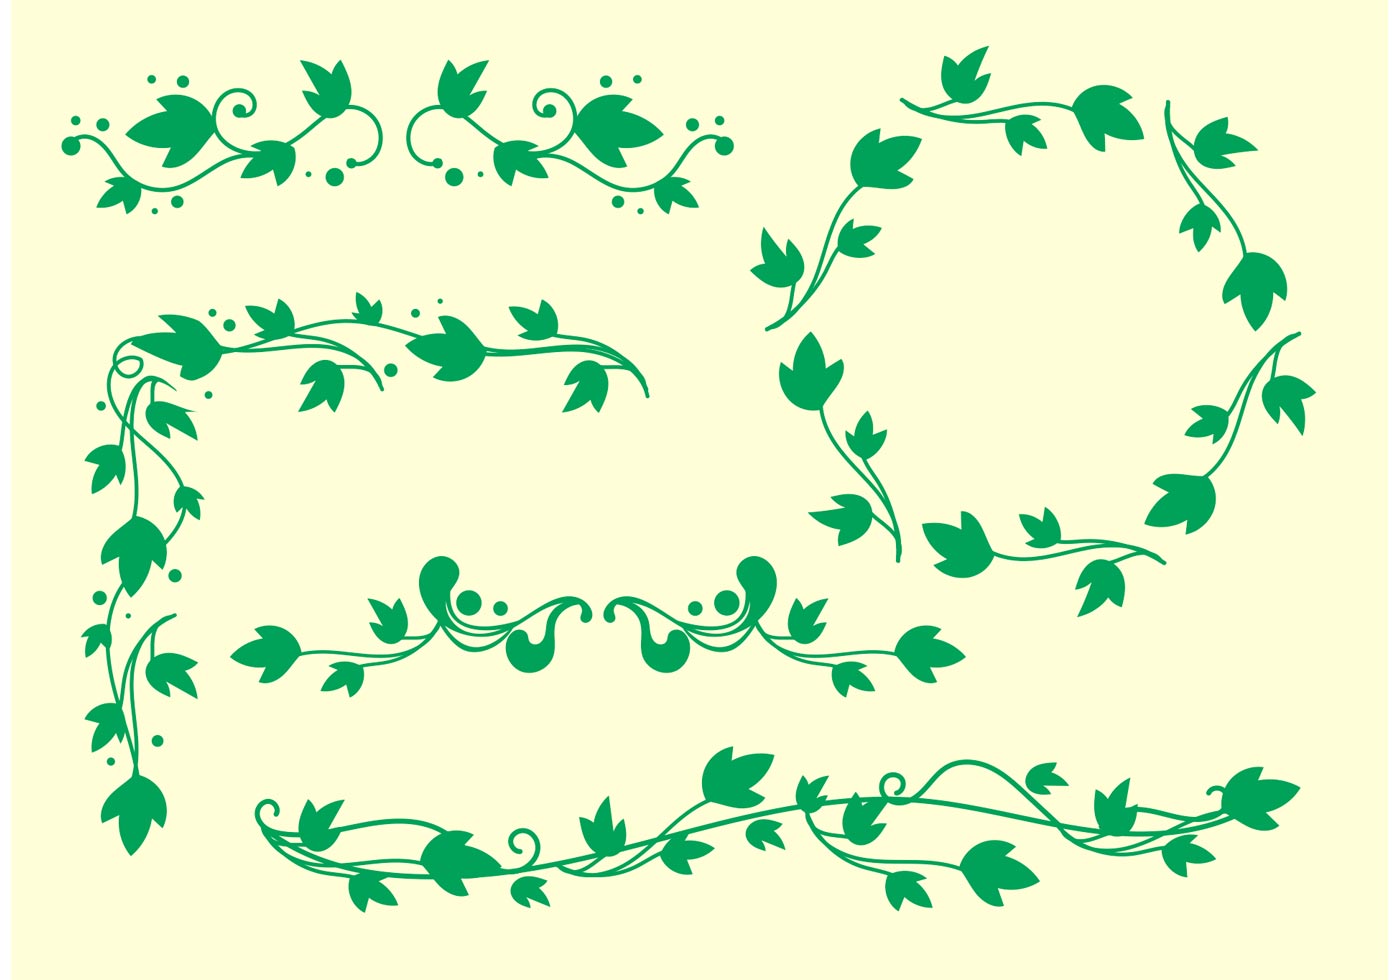 Gallery Photos of "Vines Frame Vector" .